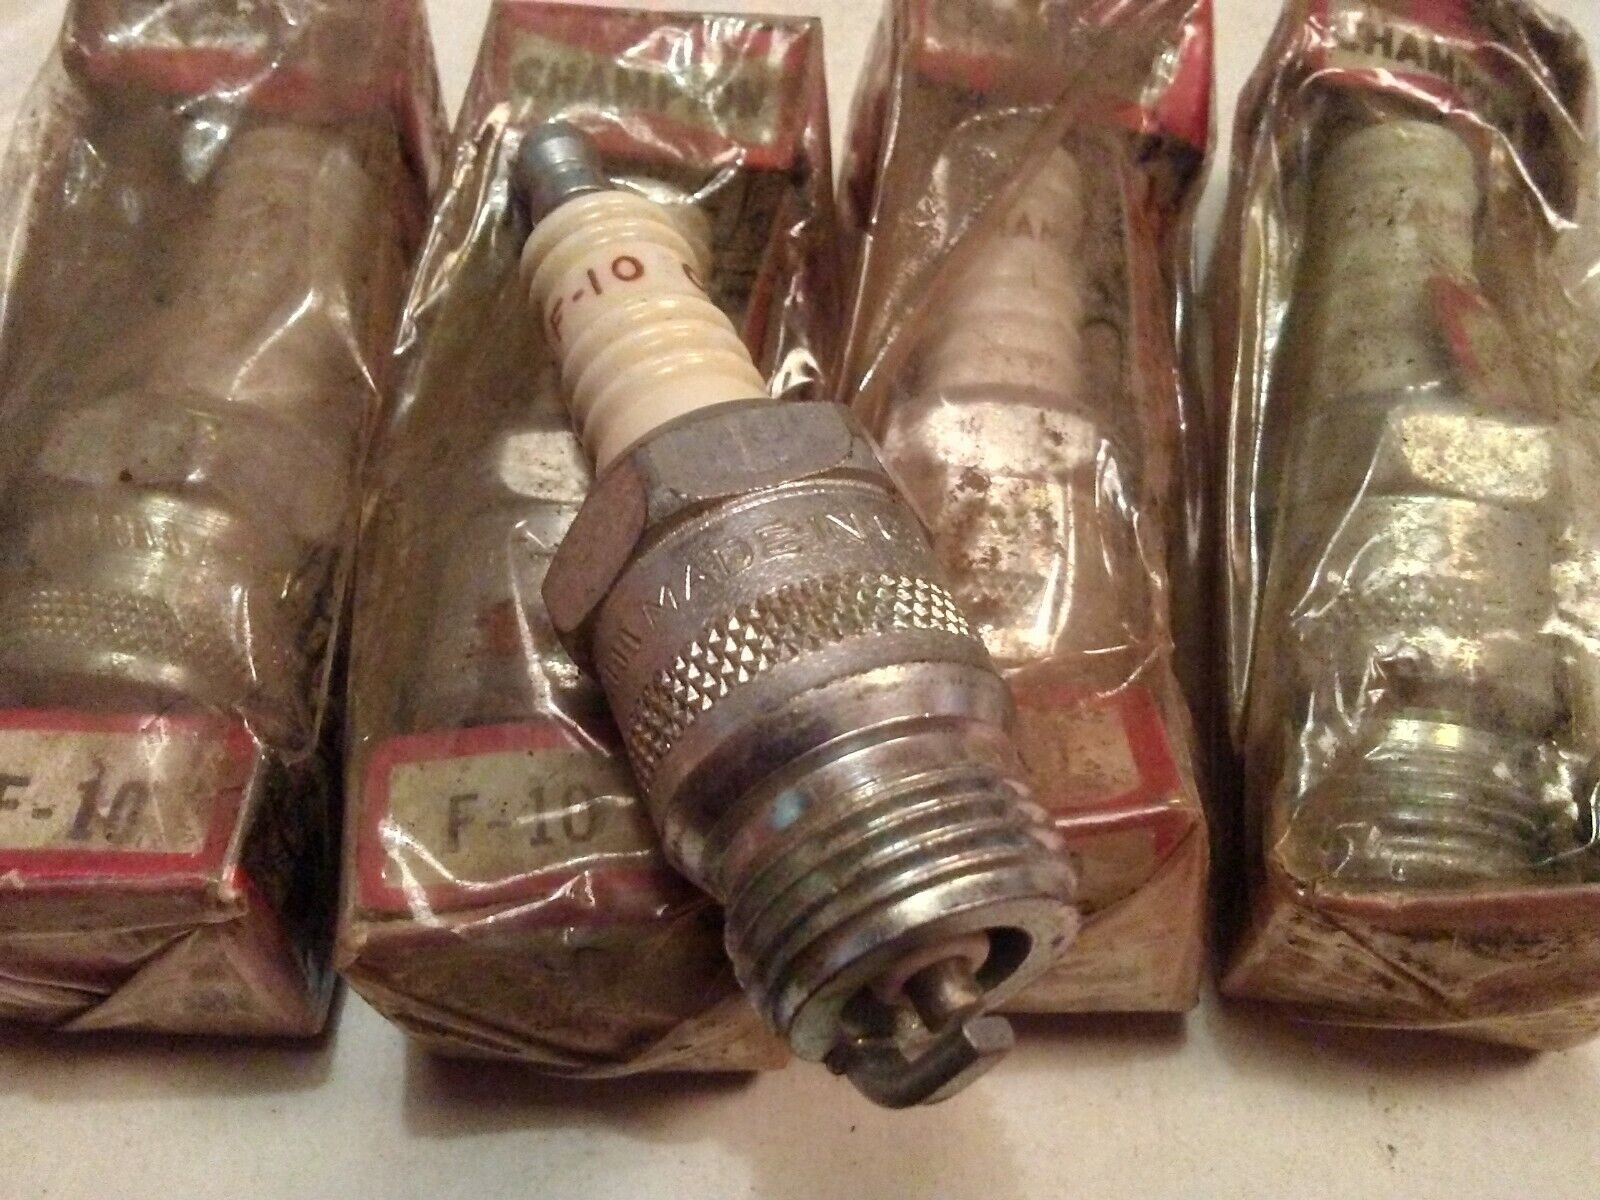 VTG NOS CHAMPION SPARK PLUGS F10 Qty. 5. PLUS 1 FREE USED ONE MADE IN USA 